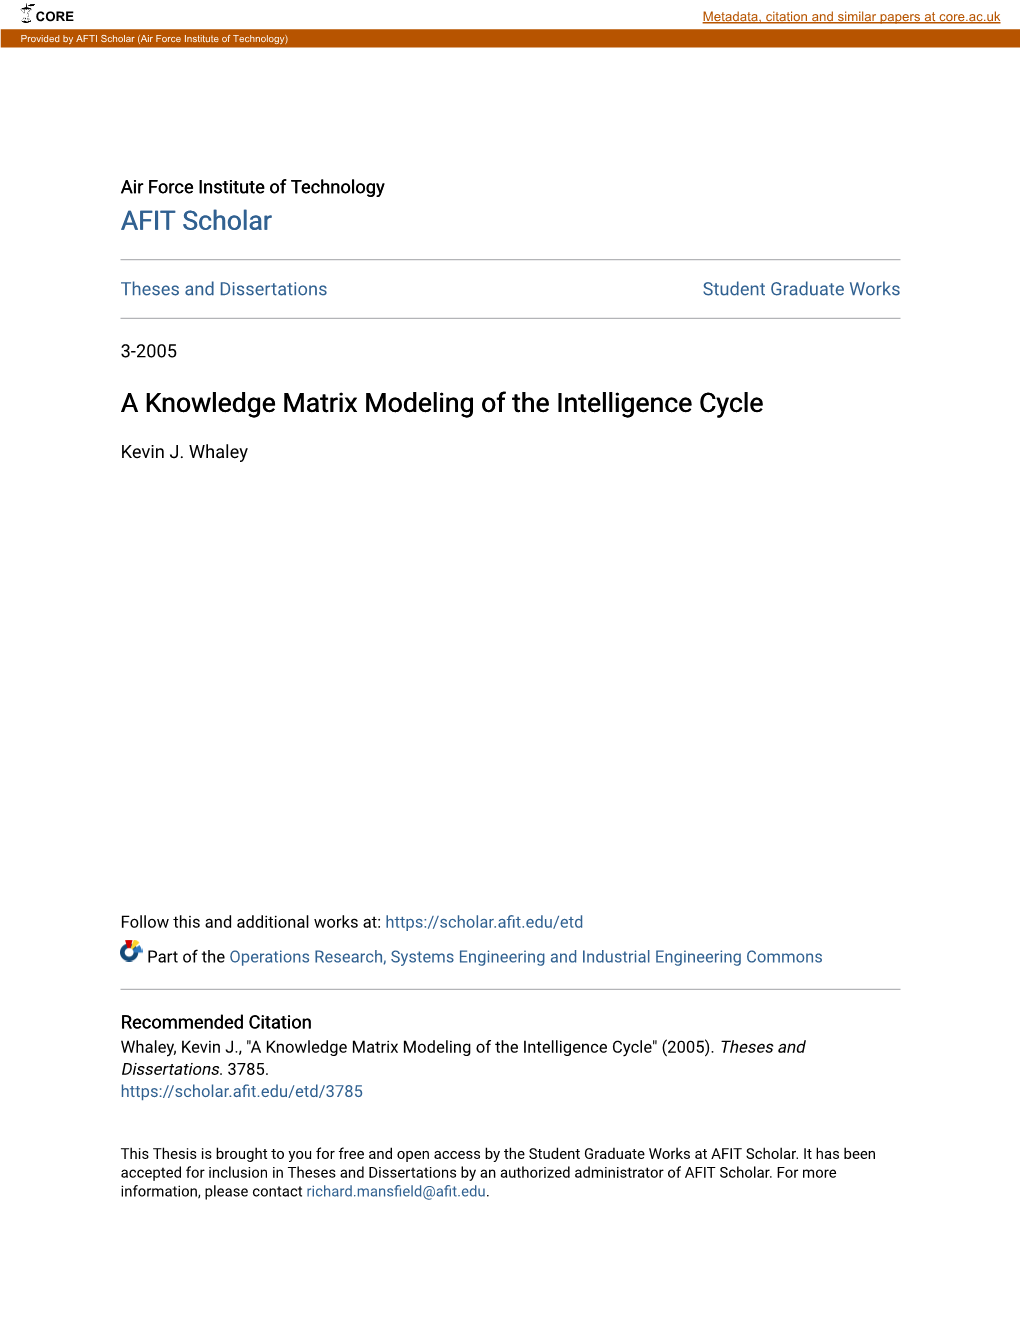 A Knowledge Matrix Modeling of the Intelligence Cycle